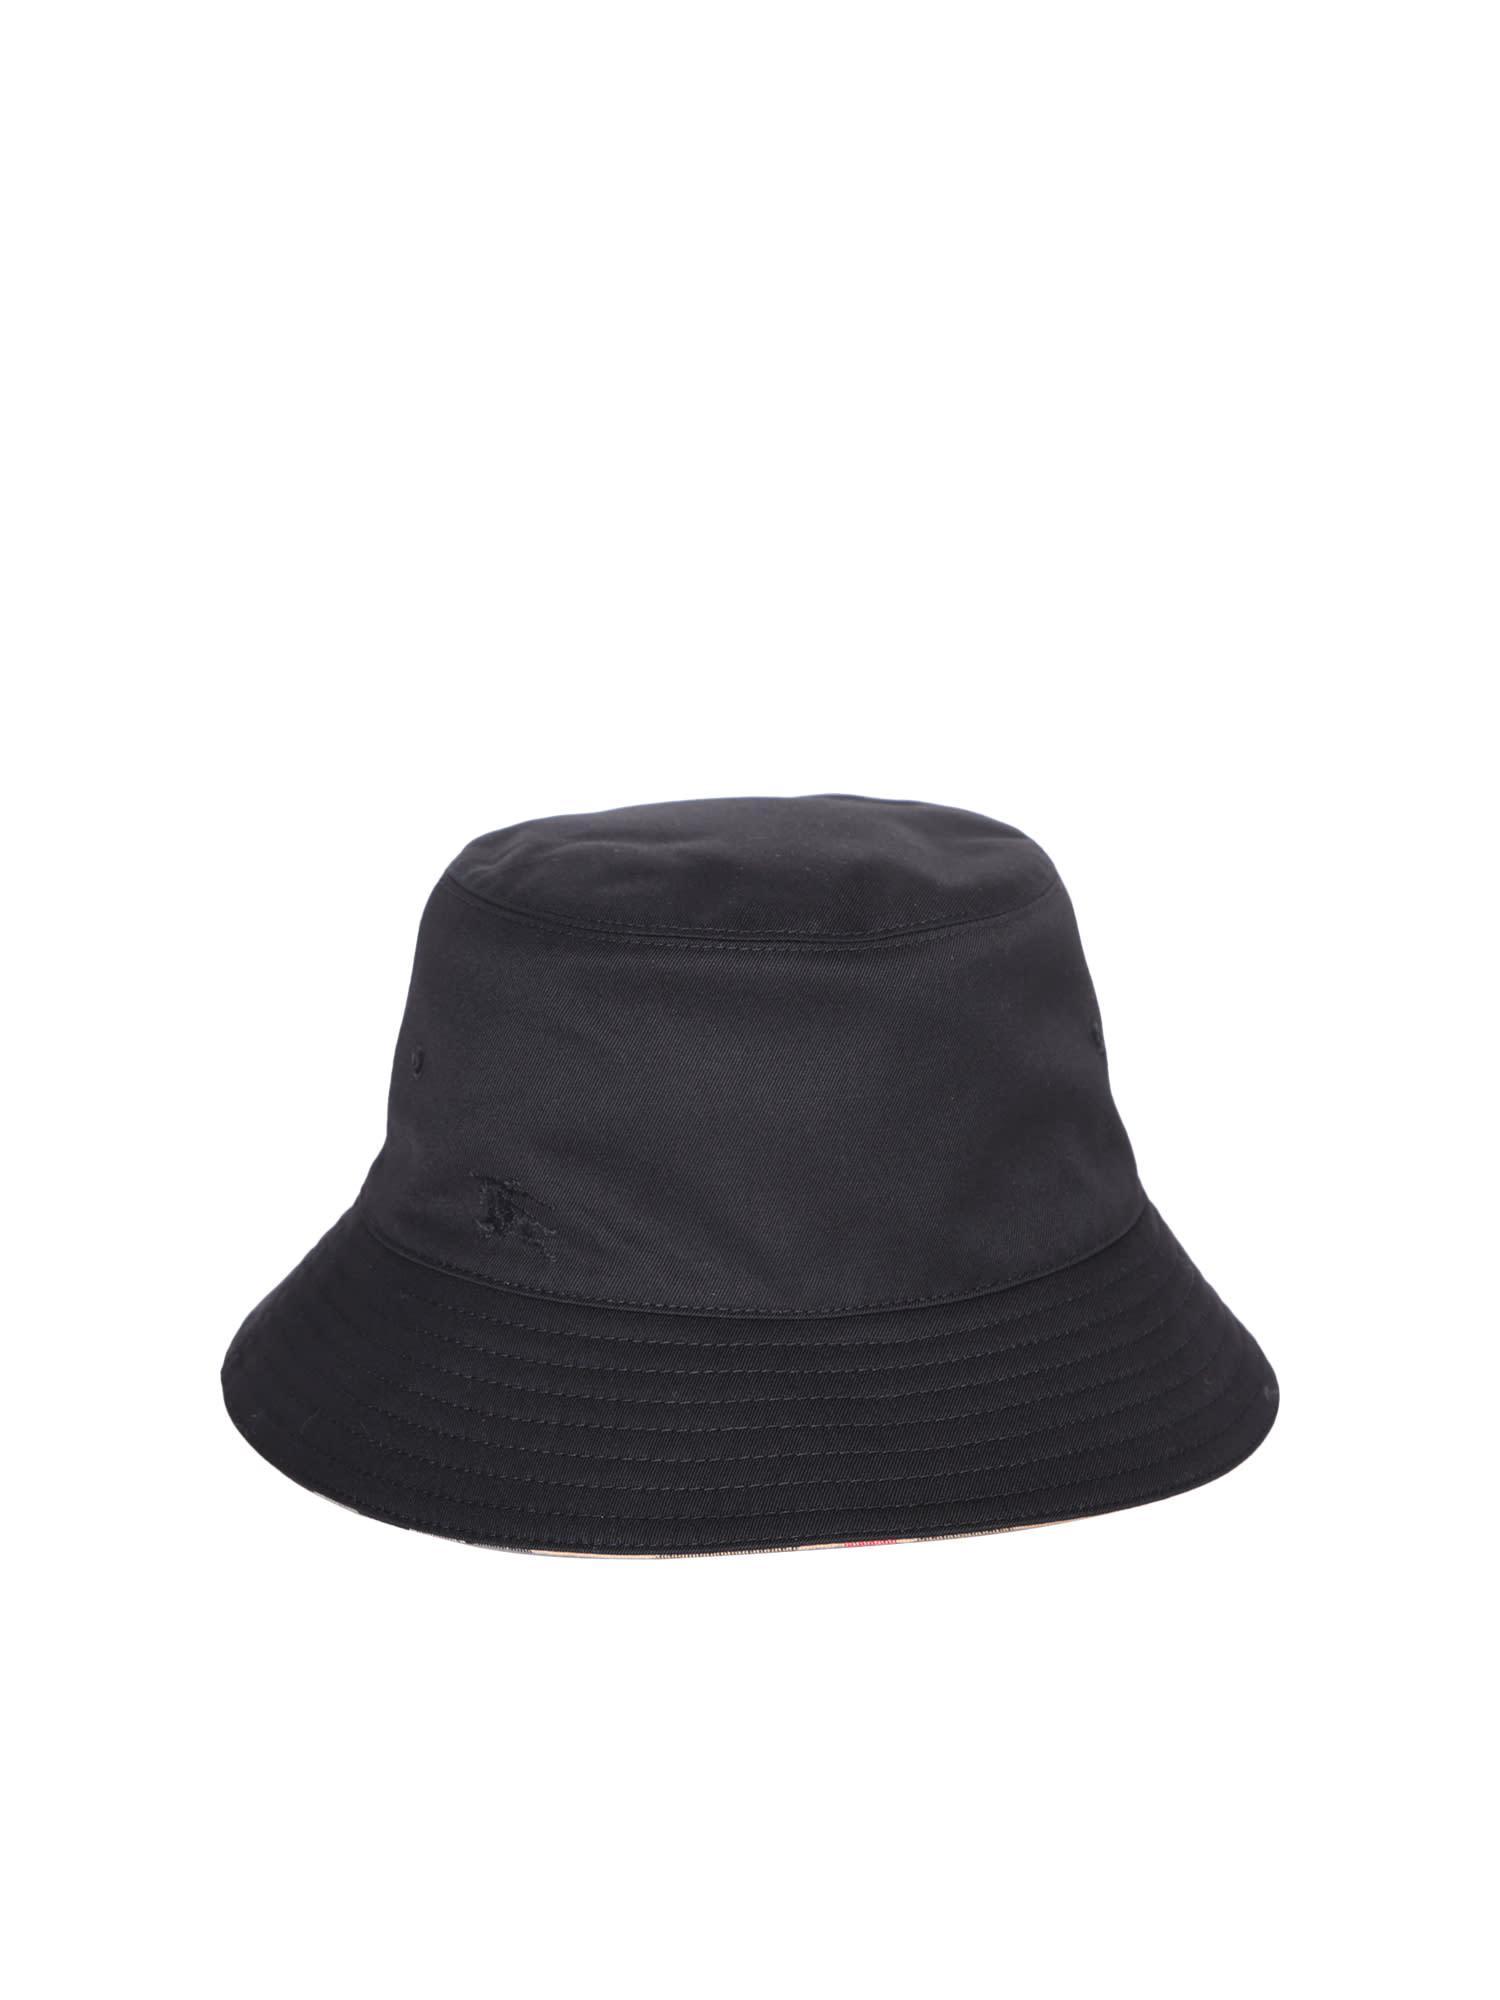 Checked Reversible Bucket Hat